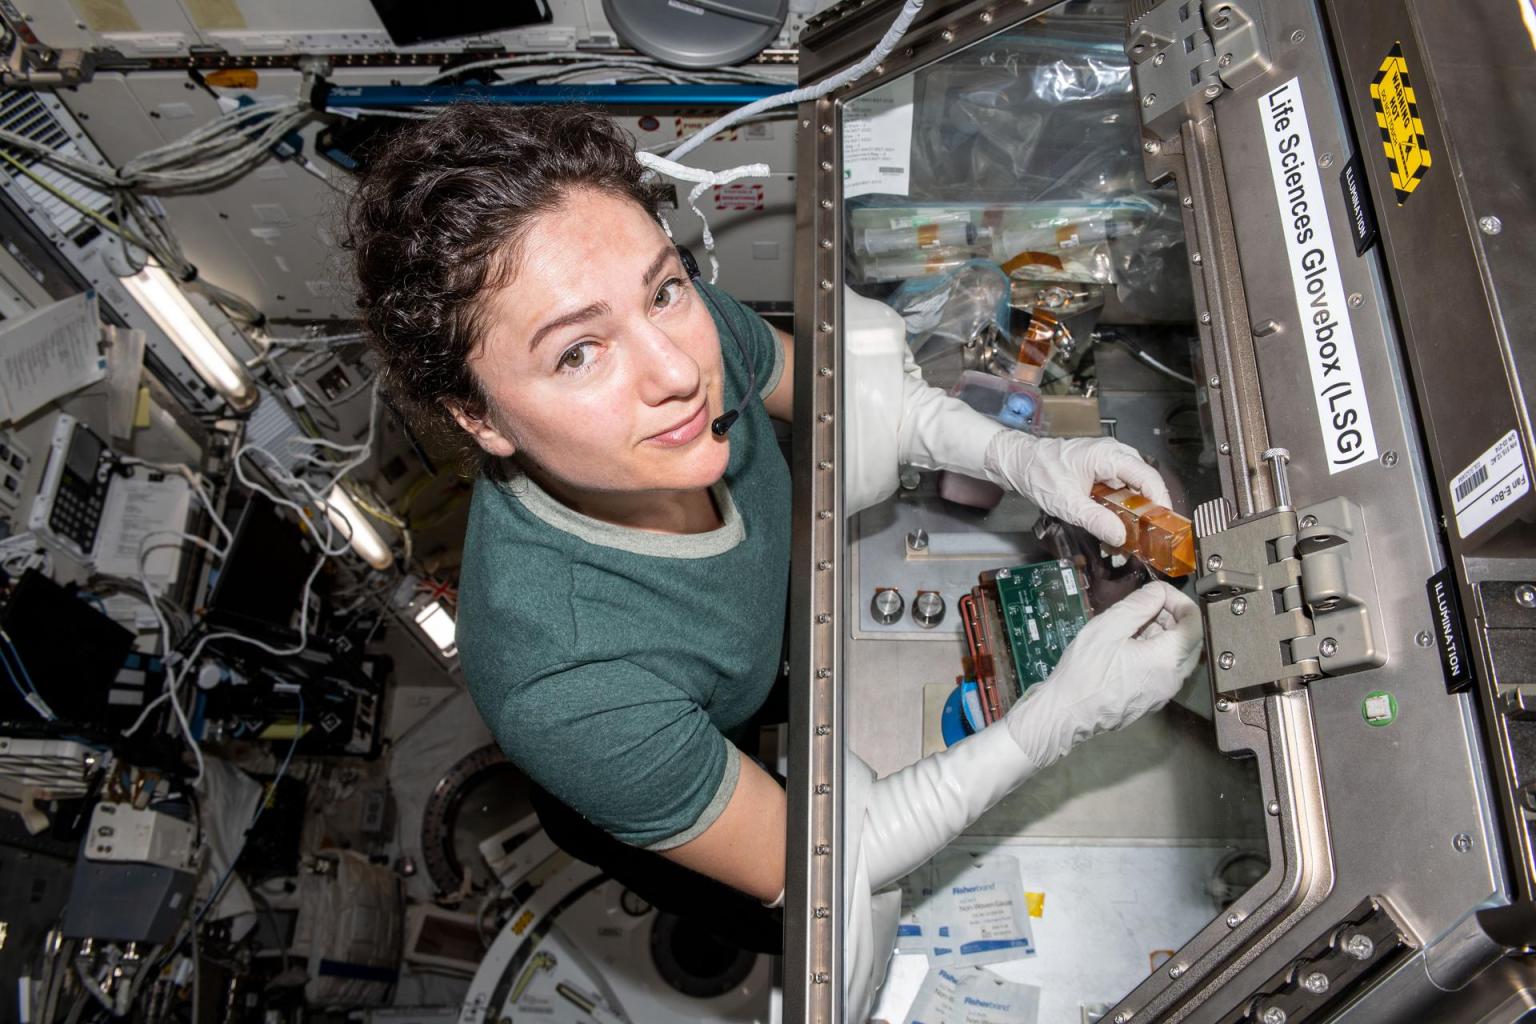 NASA astronaut and Expedition 62 Flight Engineer Jessica Meir conducts cardiac research in the Life Sciences Glovebox